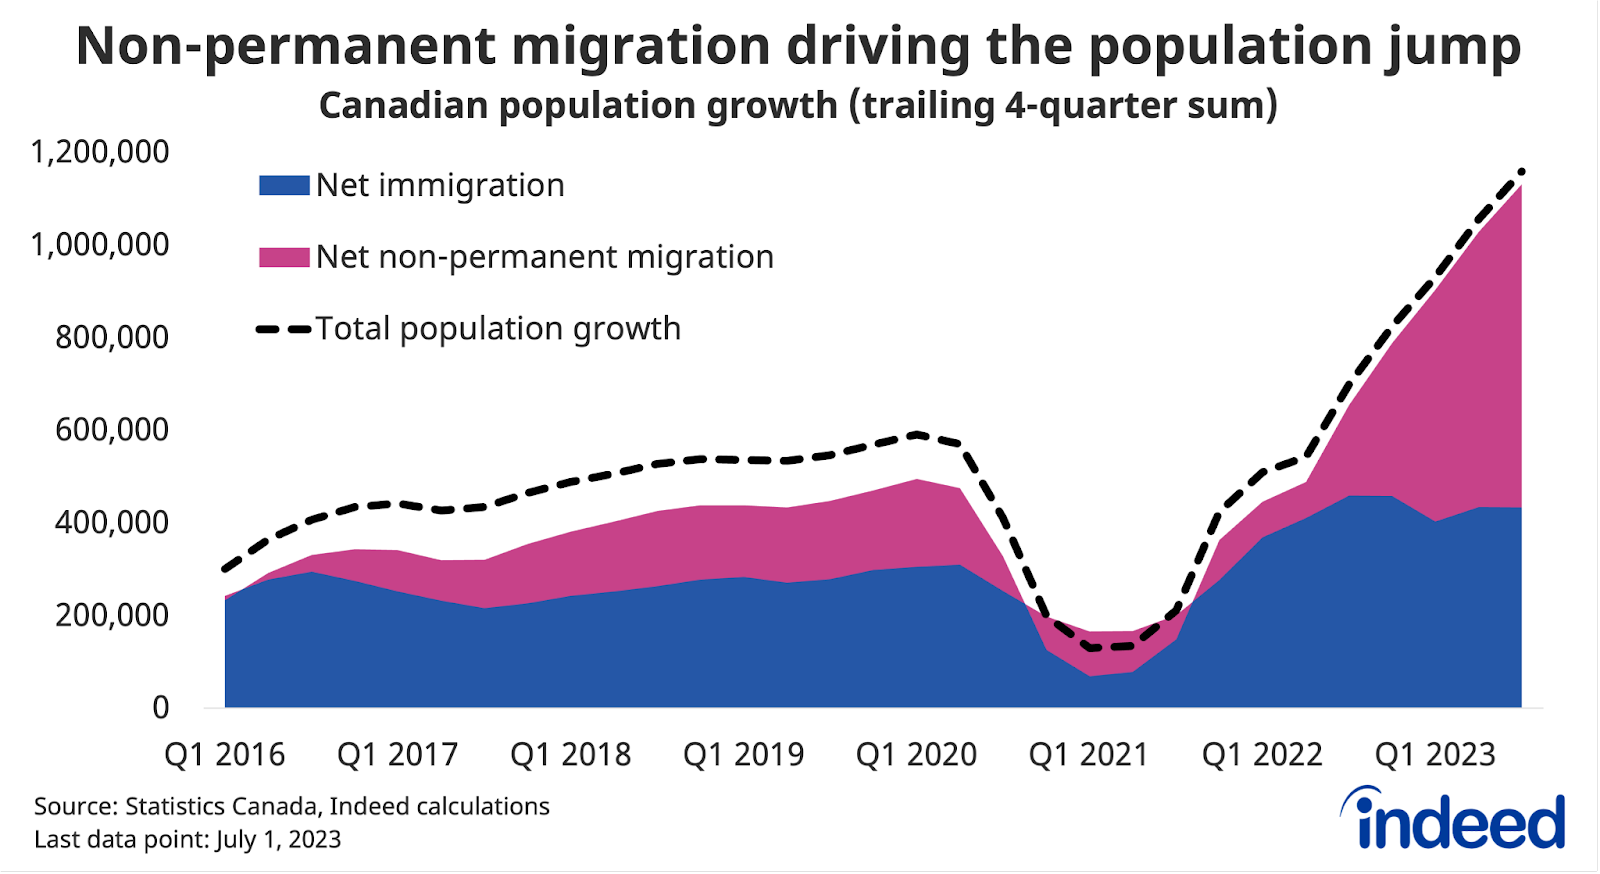 Area line graph titled “Non-permanent migration driving the population jump,” shows the trailing four-quarter sum of Canadian population growth, between January 2016 and July 2023, with contributions split between net immigration and net non-permanent migration. Annual Canadian population growth jumped to over 1 million by mid-2023, with much of the surge coming from non-permanent migration. 